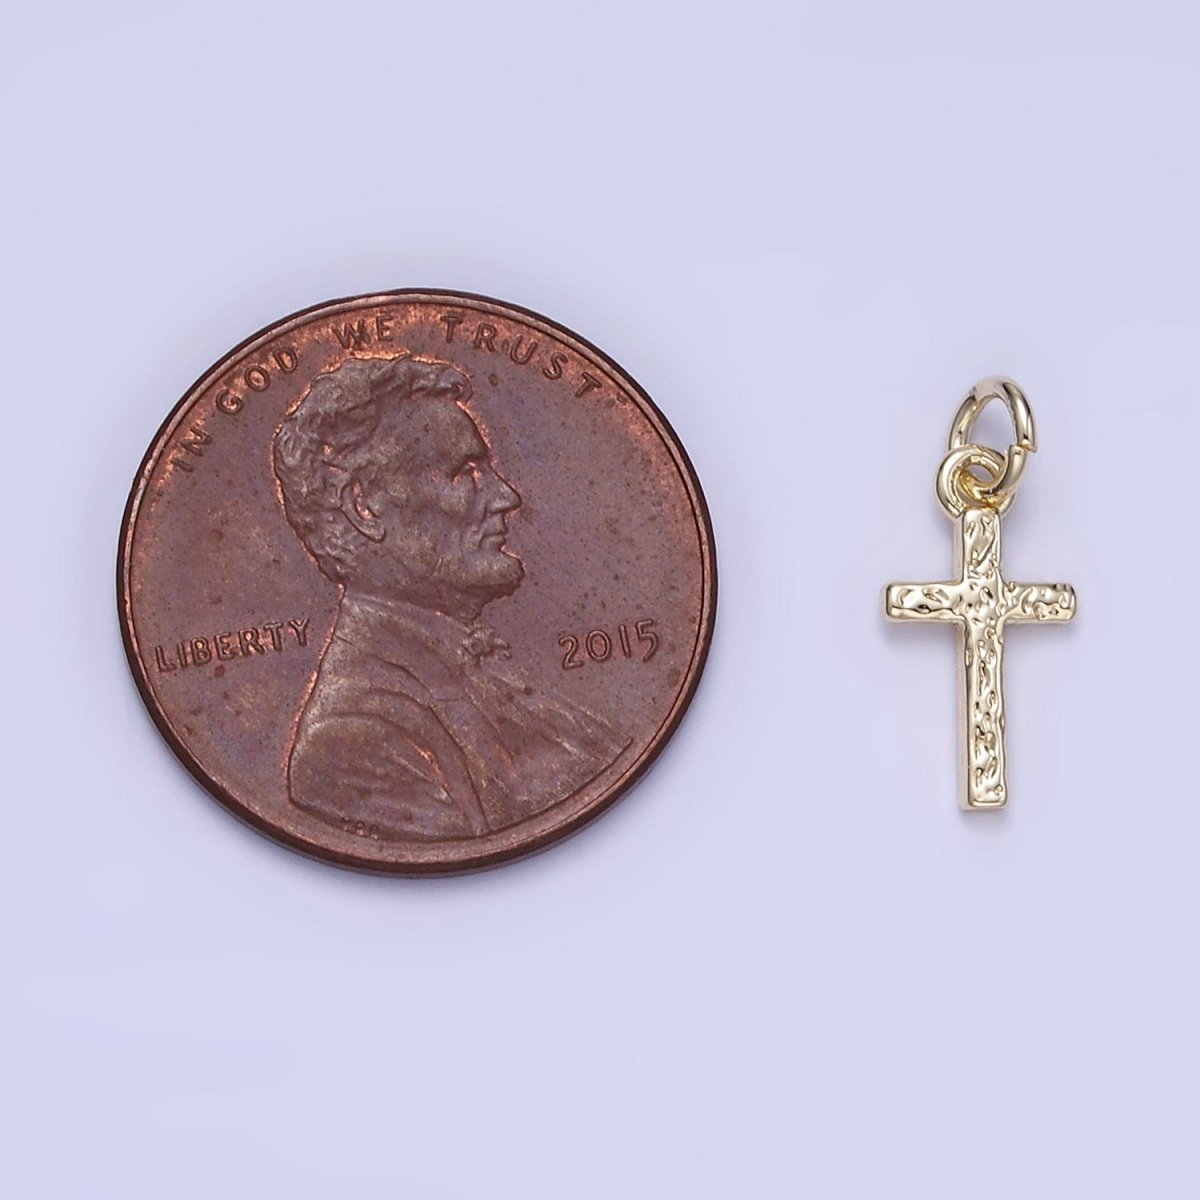 14K Gold Filled Hammered Religious Cross Mini Charm | W657 - DLUXCA